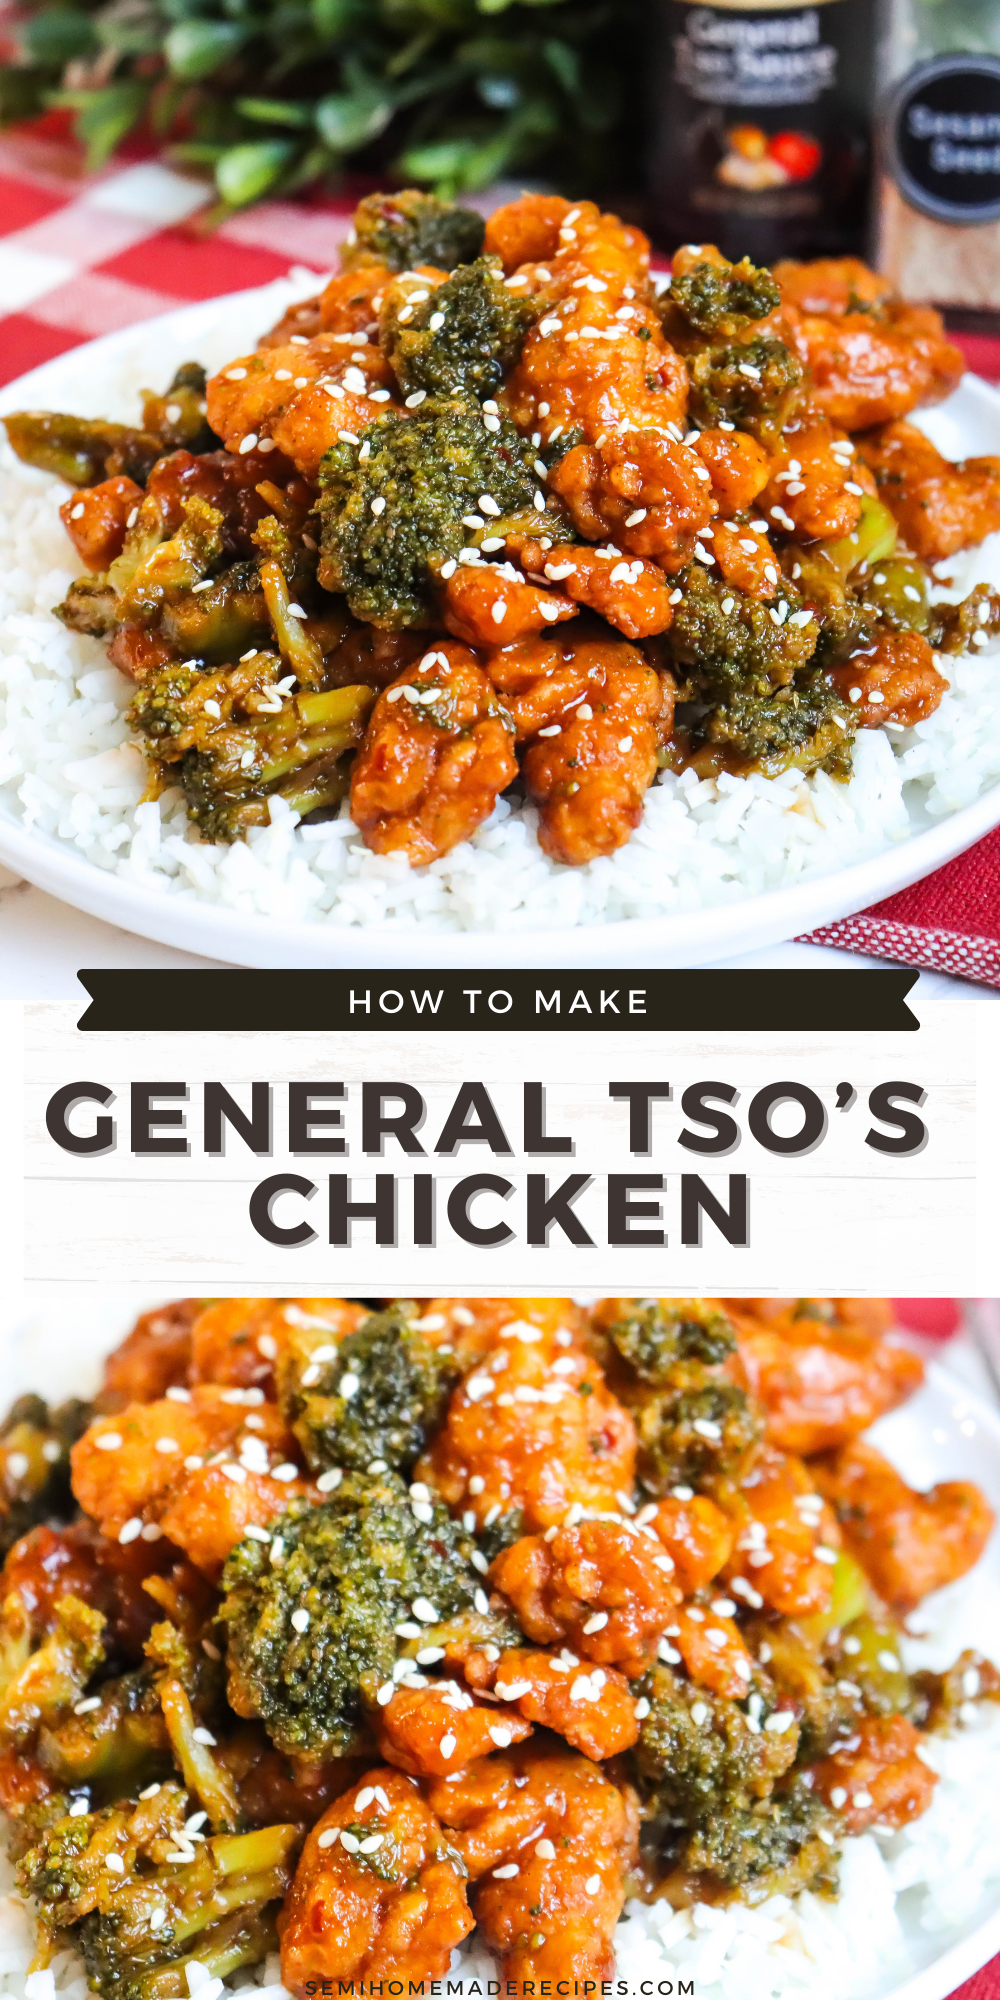 This General Tso's Chicken is one of our favorite Chinese restaurant take out menu items with a Semi Homemade Twist. Popcorn chicken, General Tso's sauce, and frozen broccoli come together for a quick and easy dinner idea!